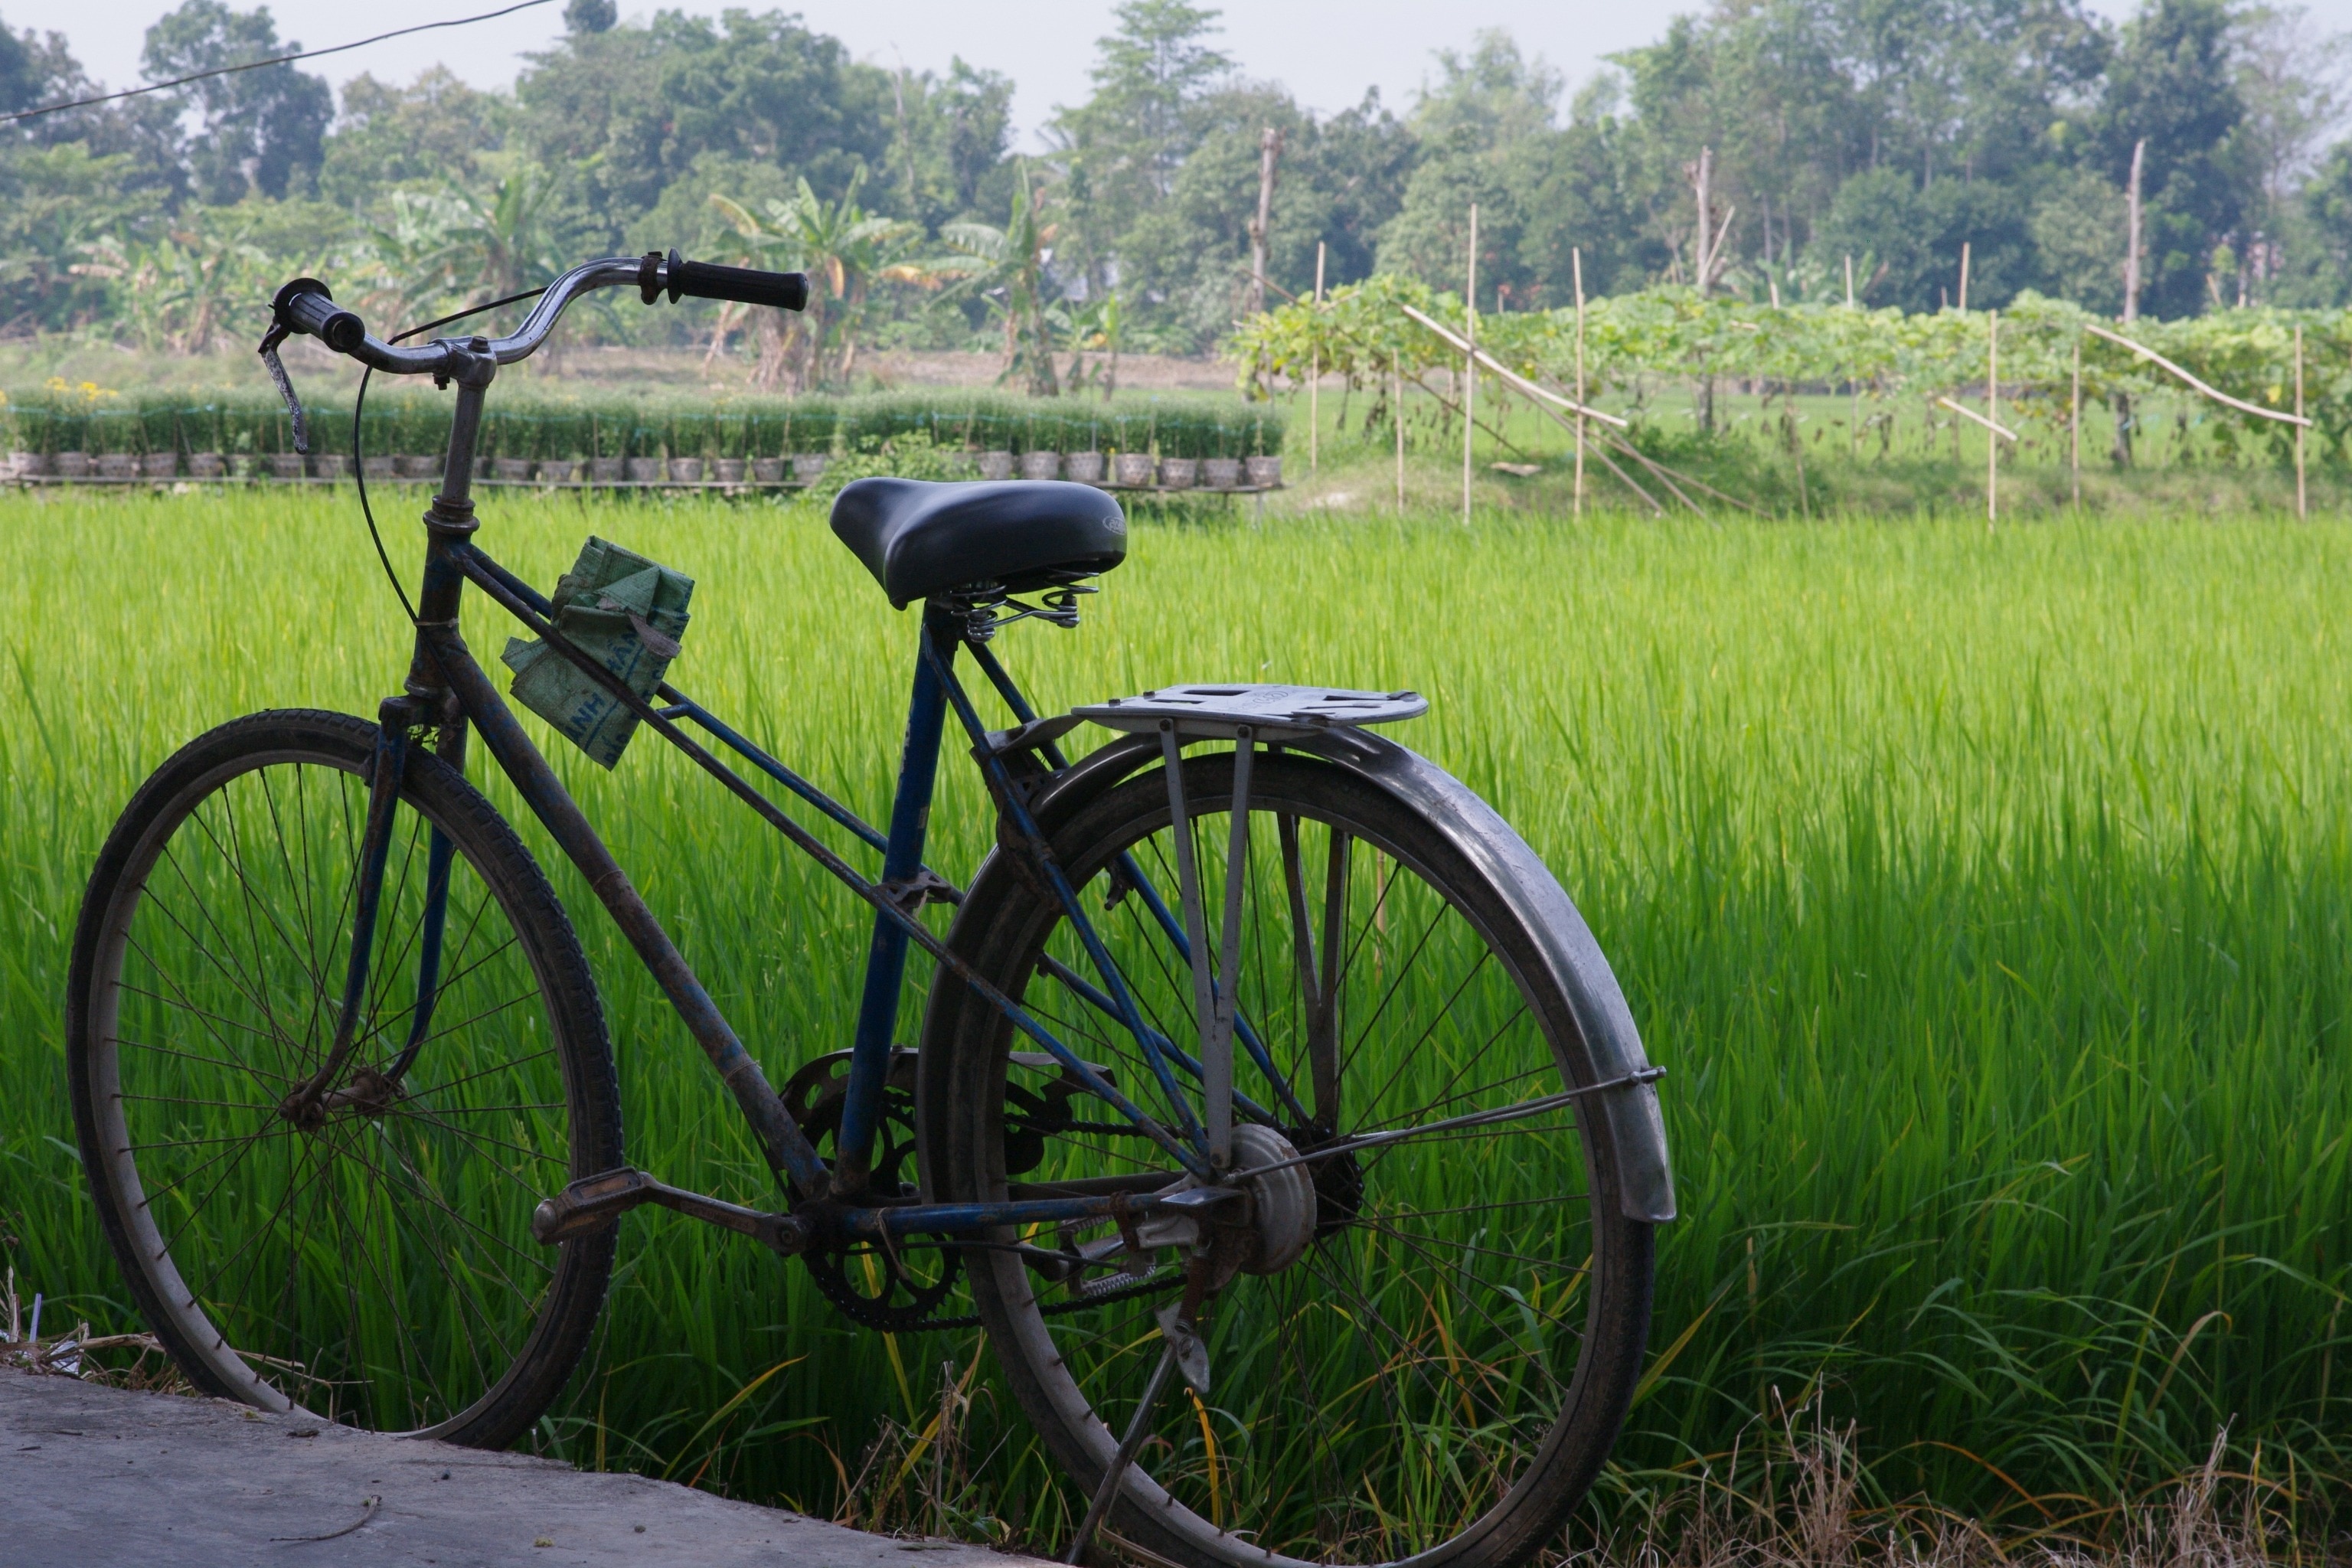 Black Fixed Gear Bicycle - Bicycle In Paddy Field , HD Wallpaper & Backgrounds